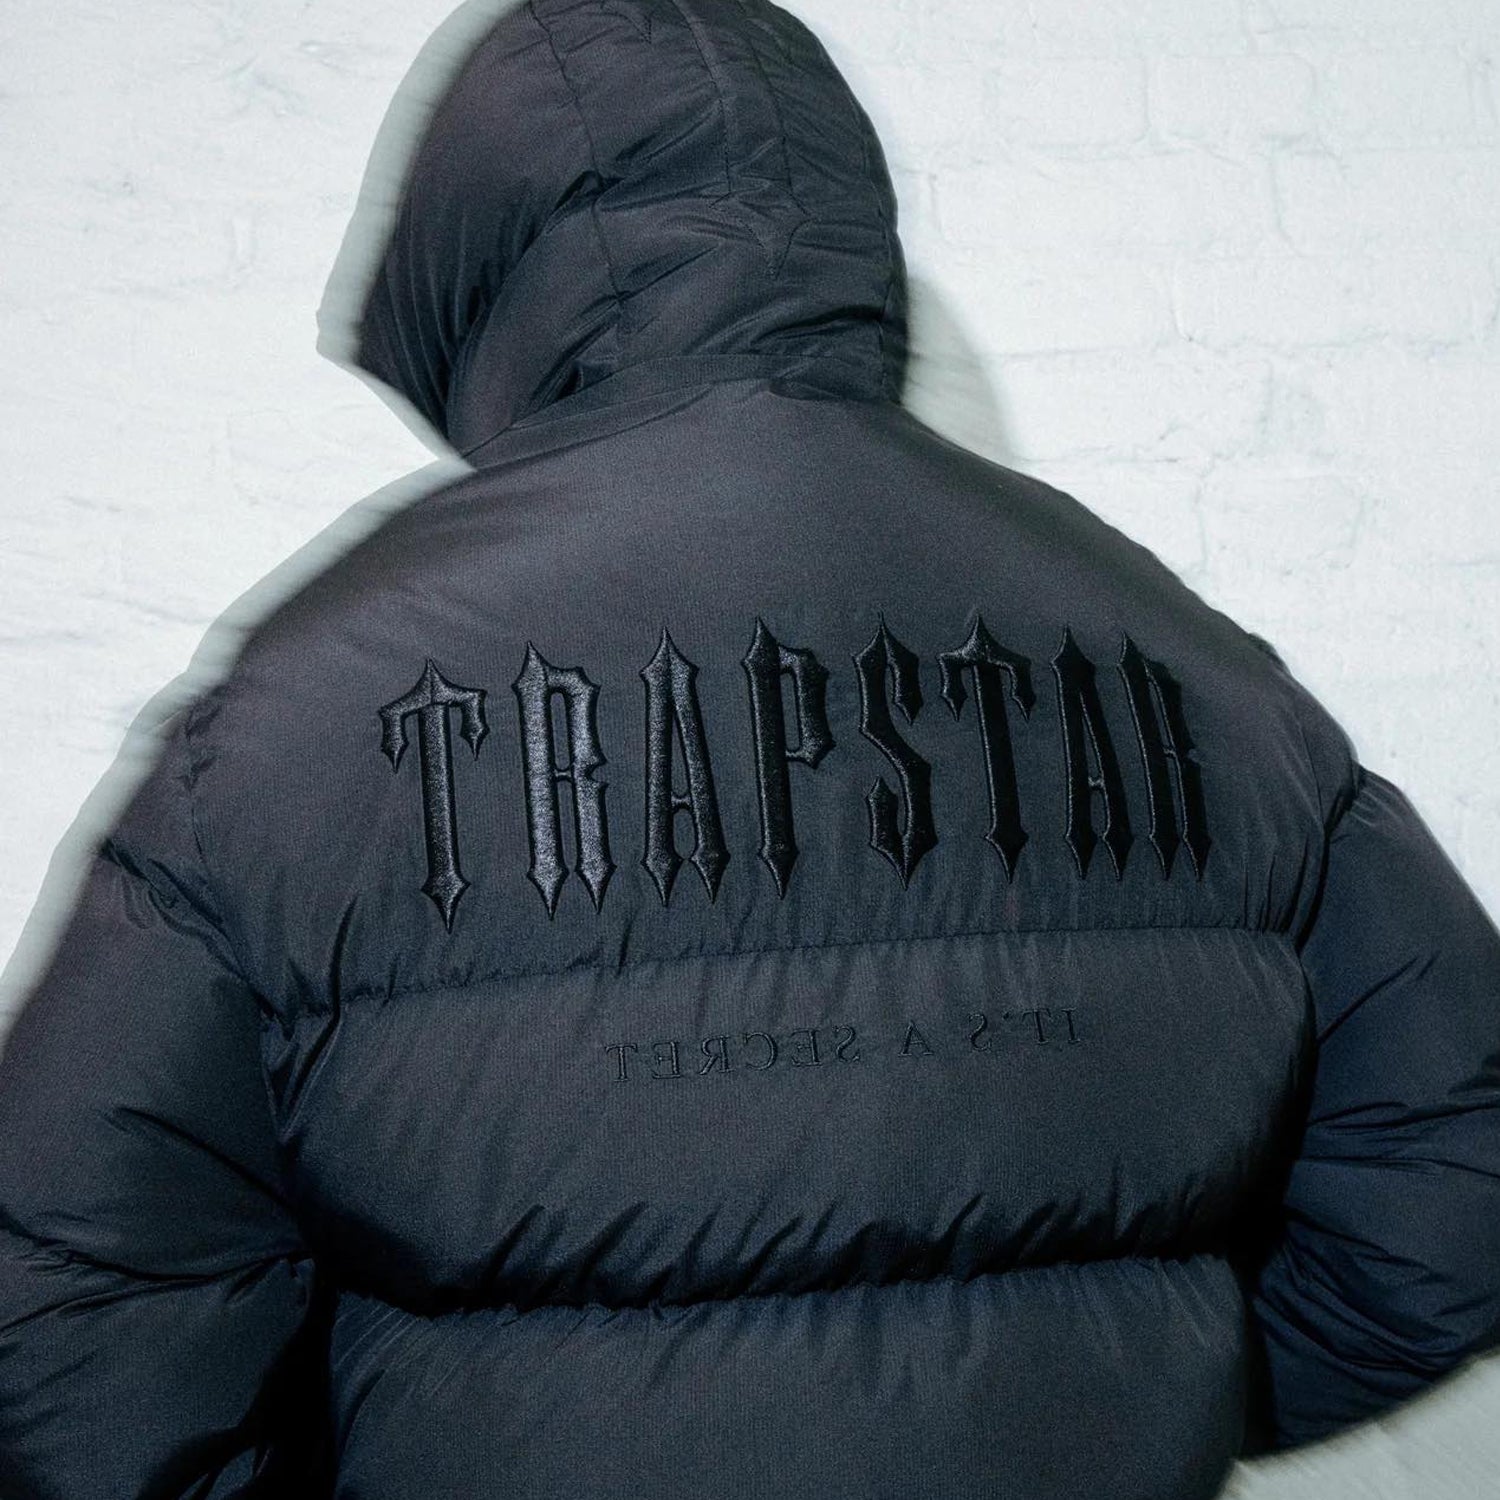 Trapstar Decoded Hooded Puffer 2.0 Jacket - Blackout